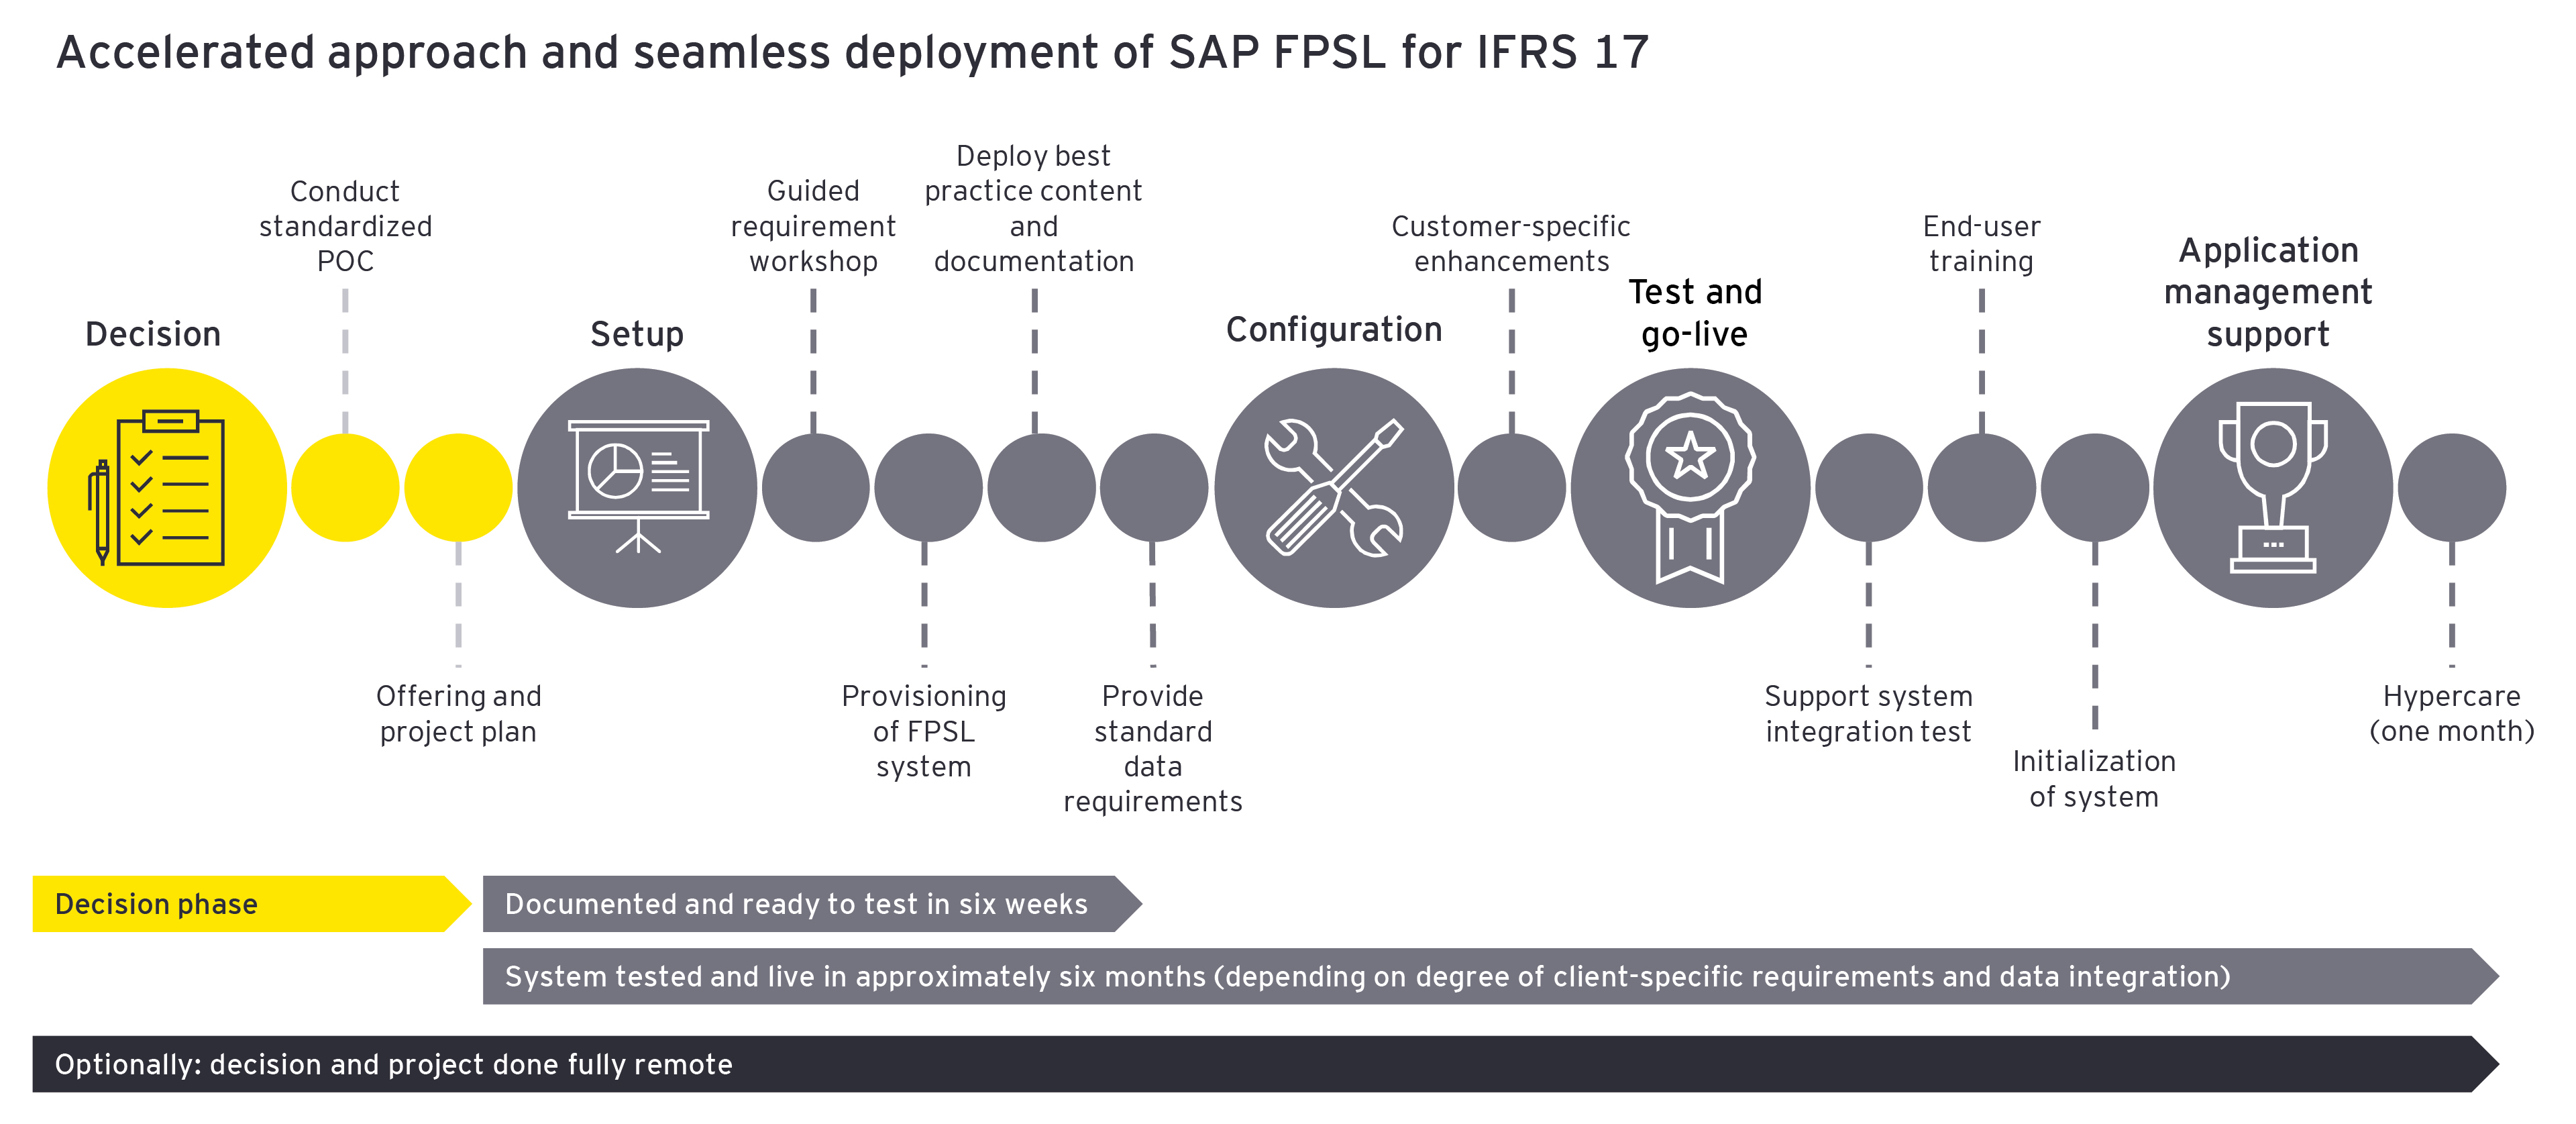 Accelerated approach and seamless deployment of SAP FPSL for IFRS 17